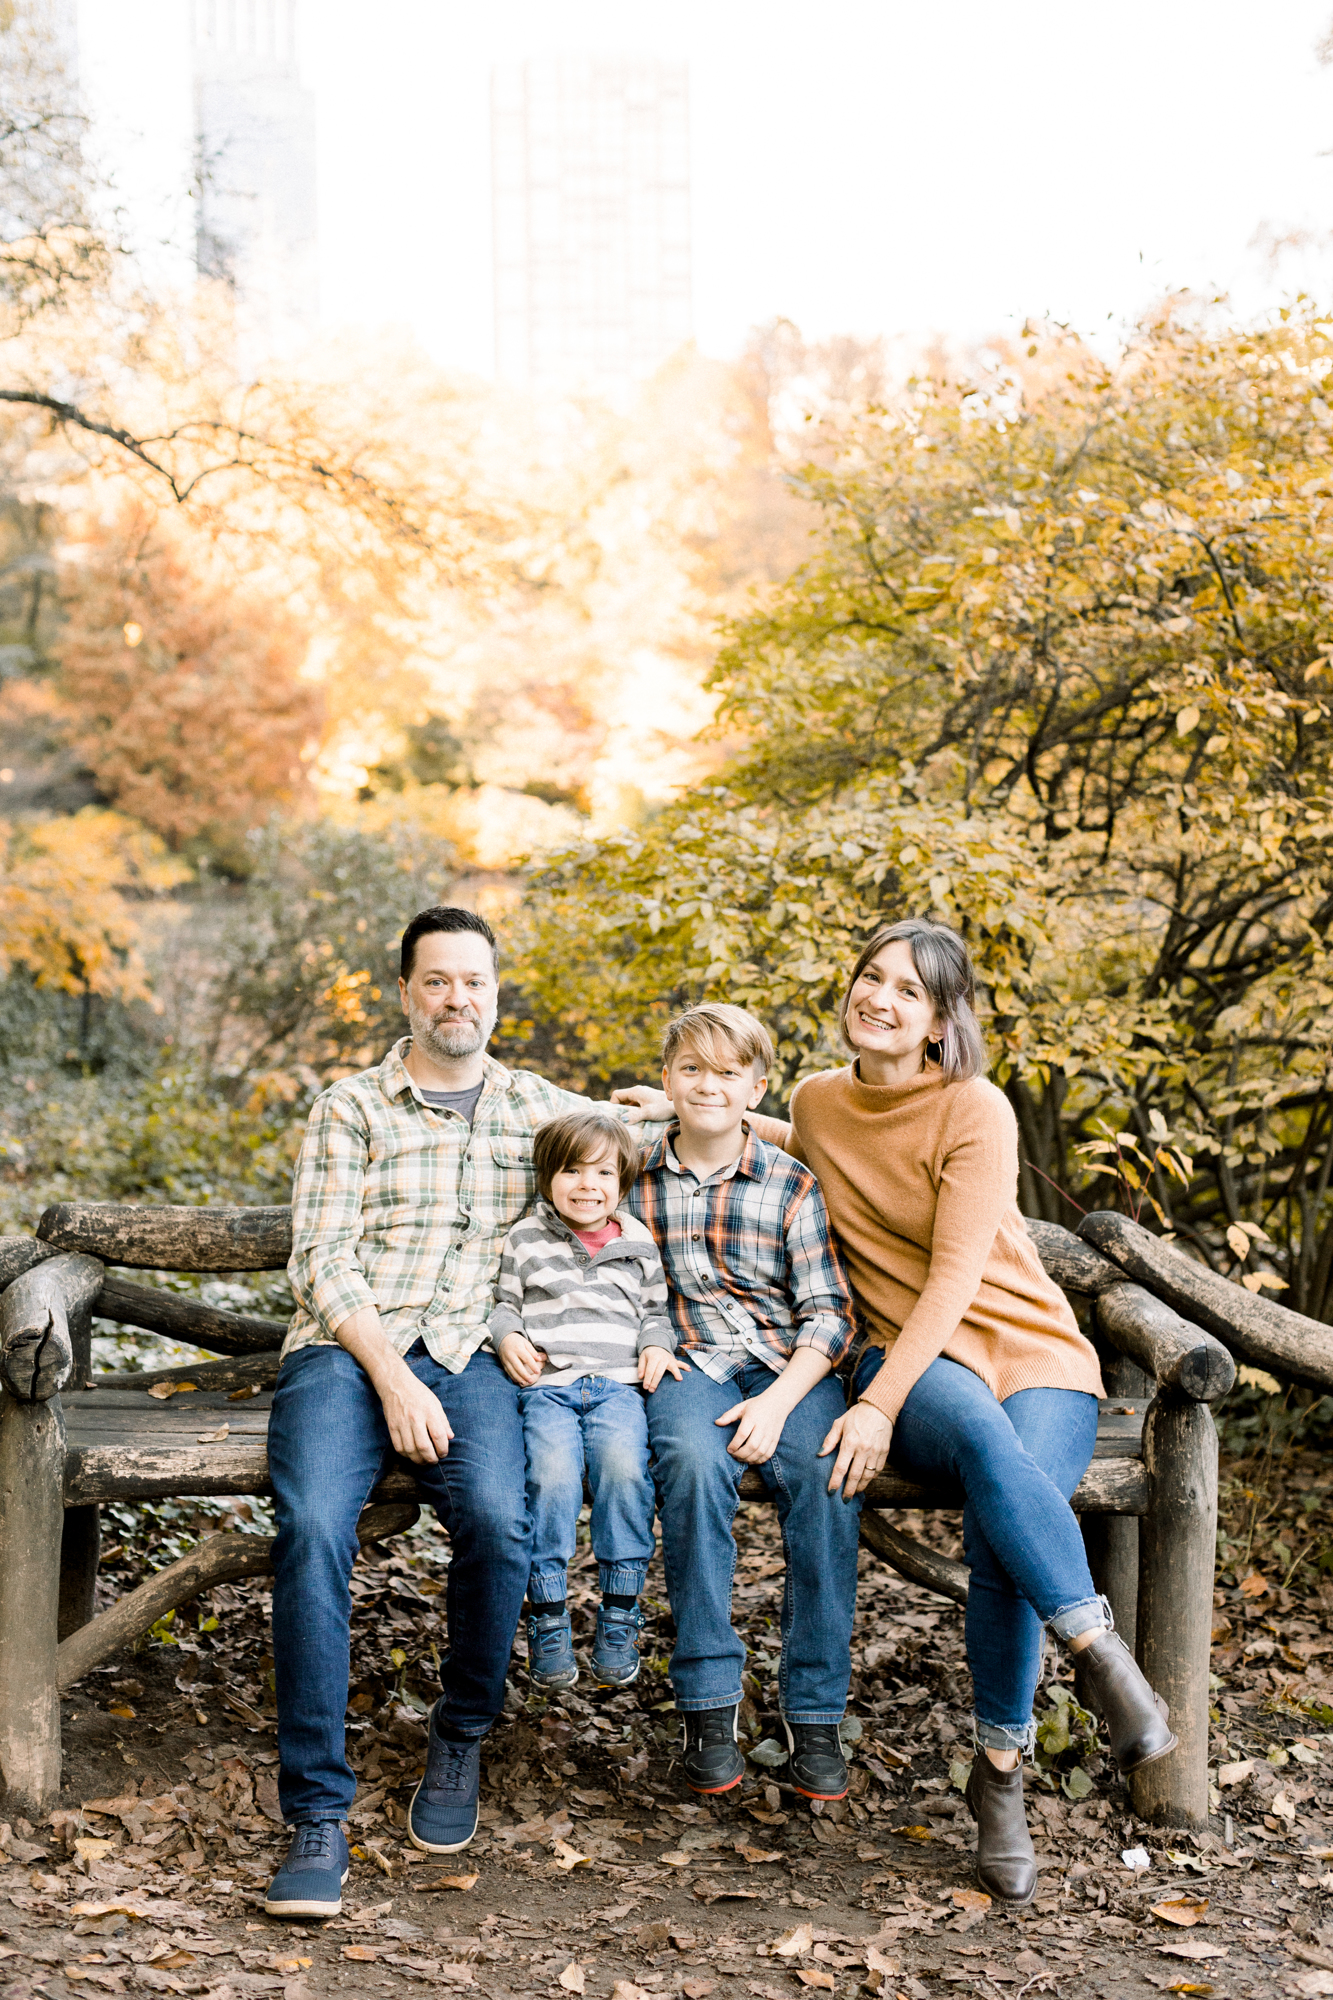 Personal Central Park Family Photos in New York